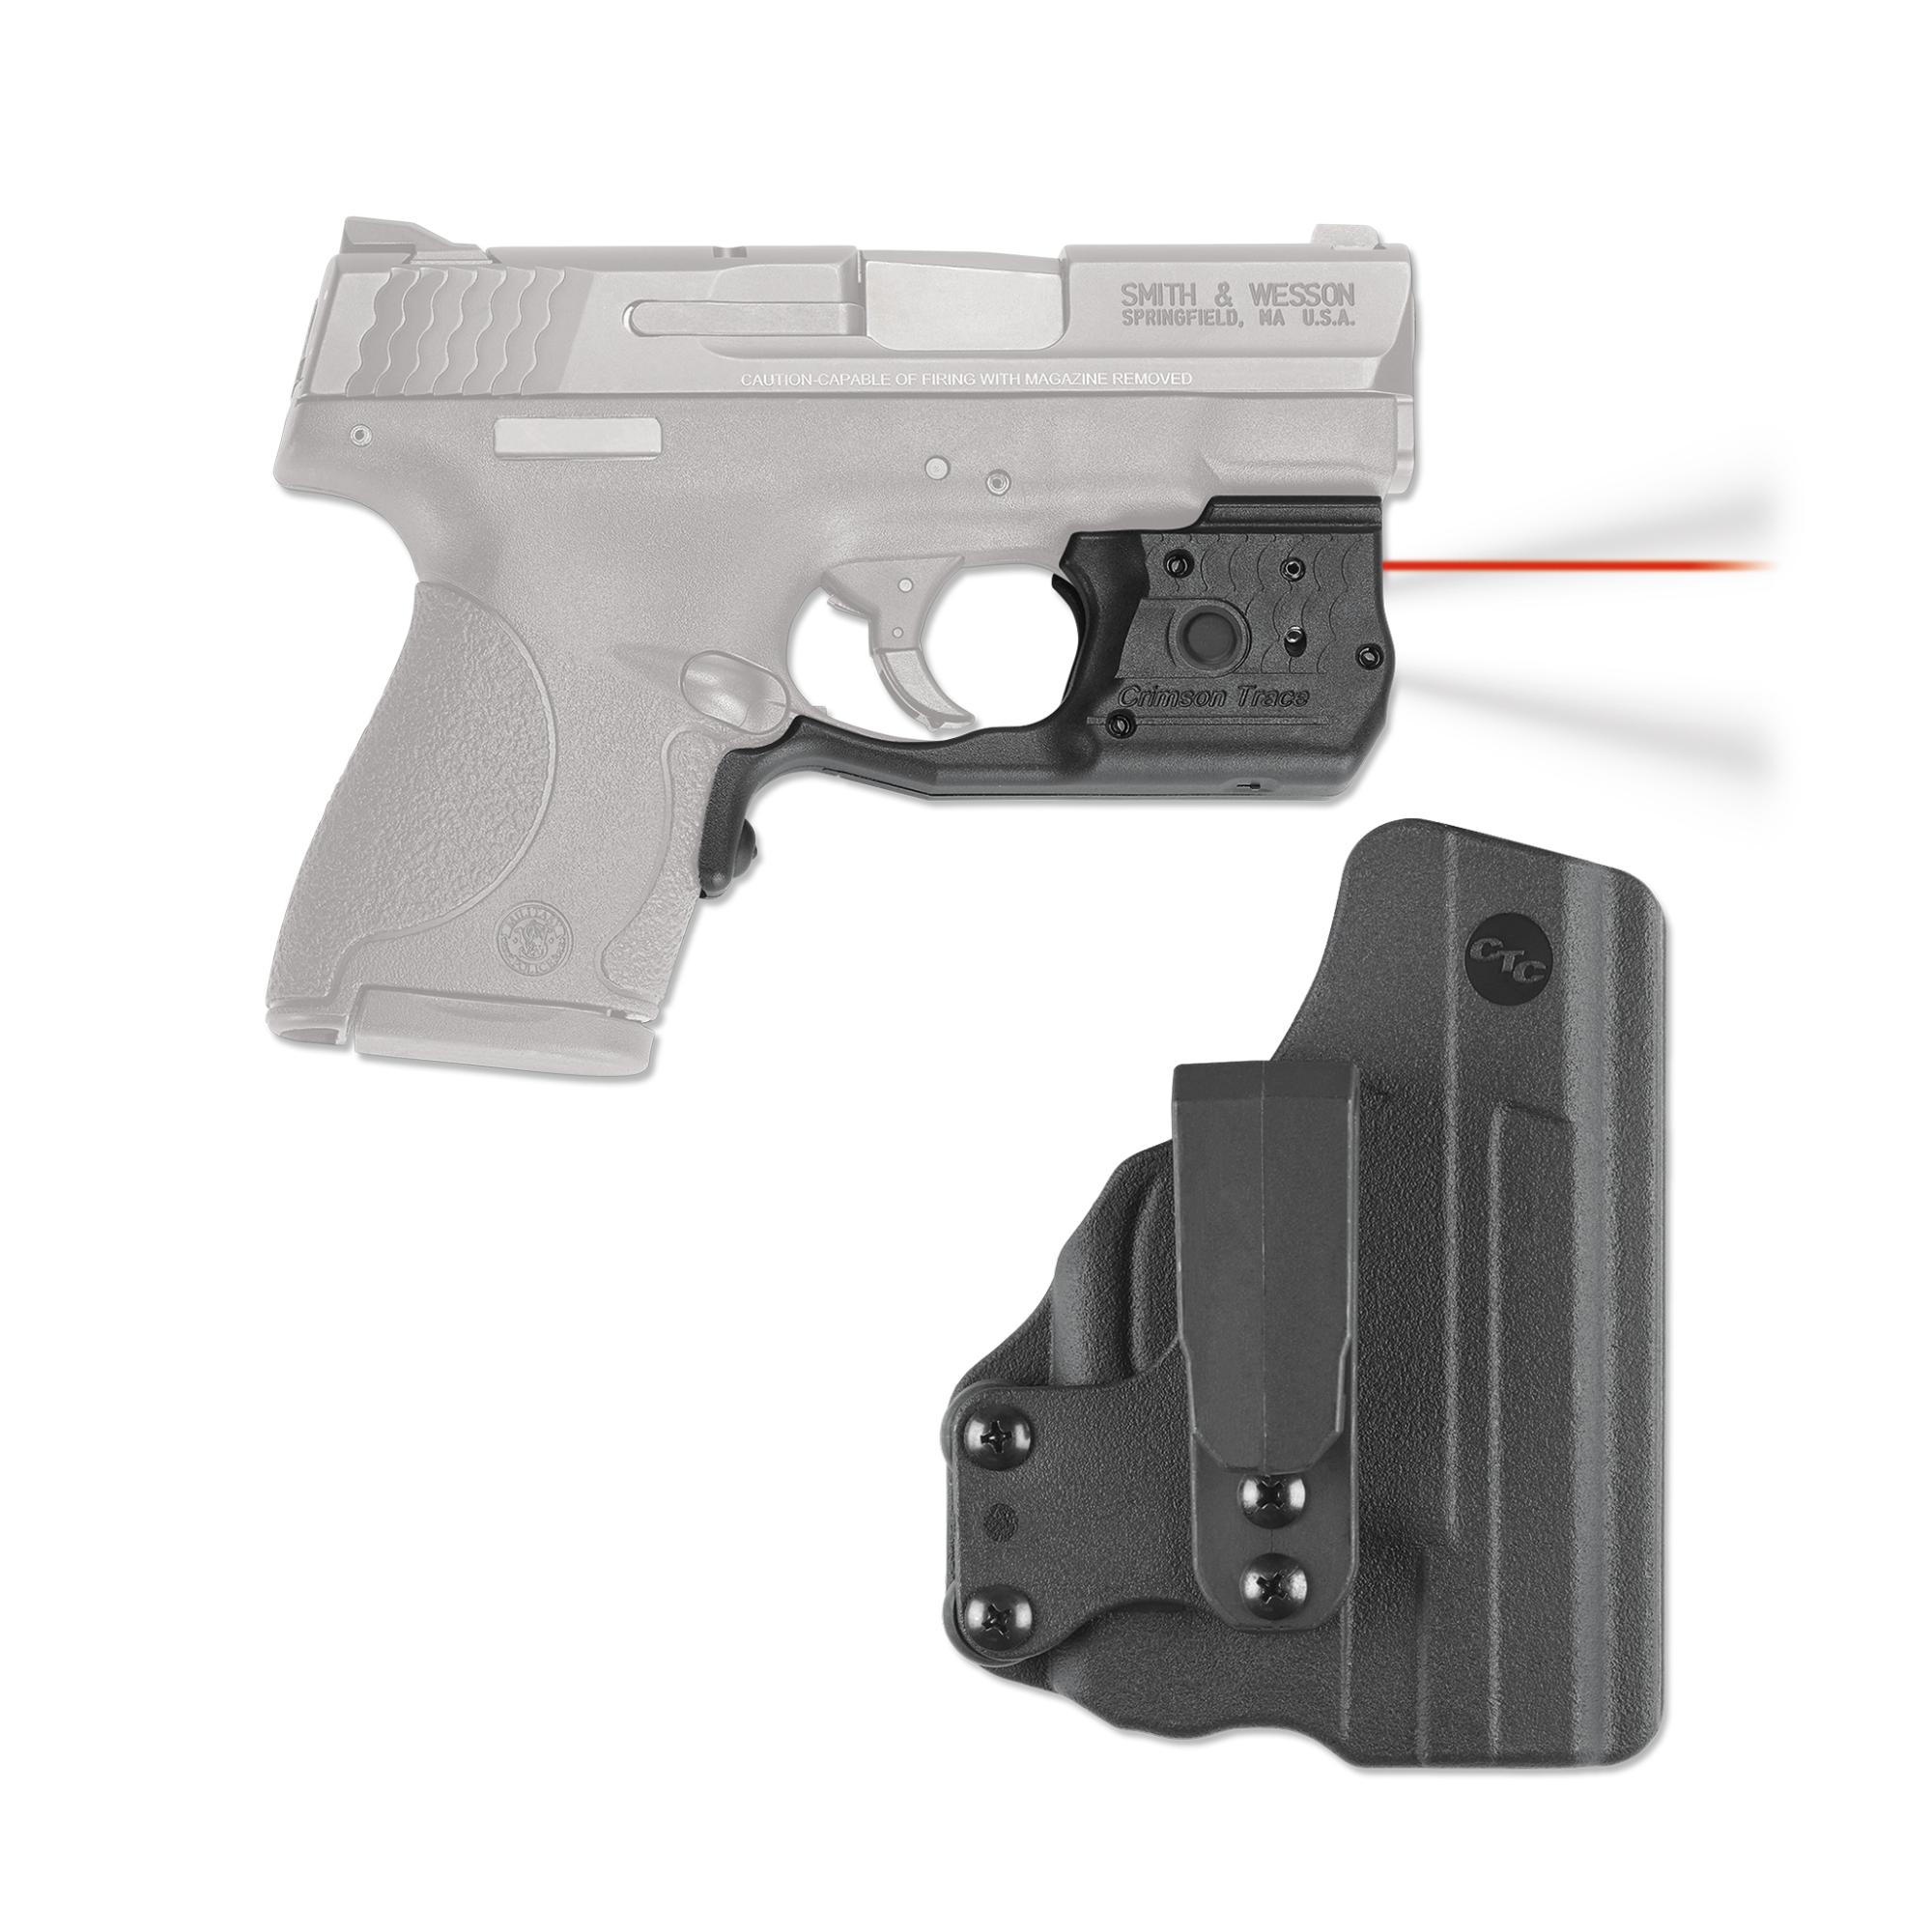 Details about  / Crimson Trace LL-808-HBT Red Laser//Light//IWB Holster S/&W Shield 45acp ONLY LL808